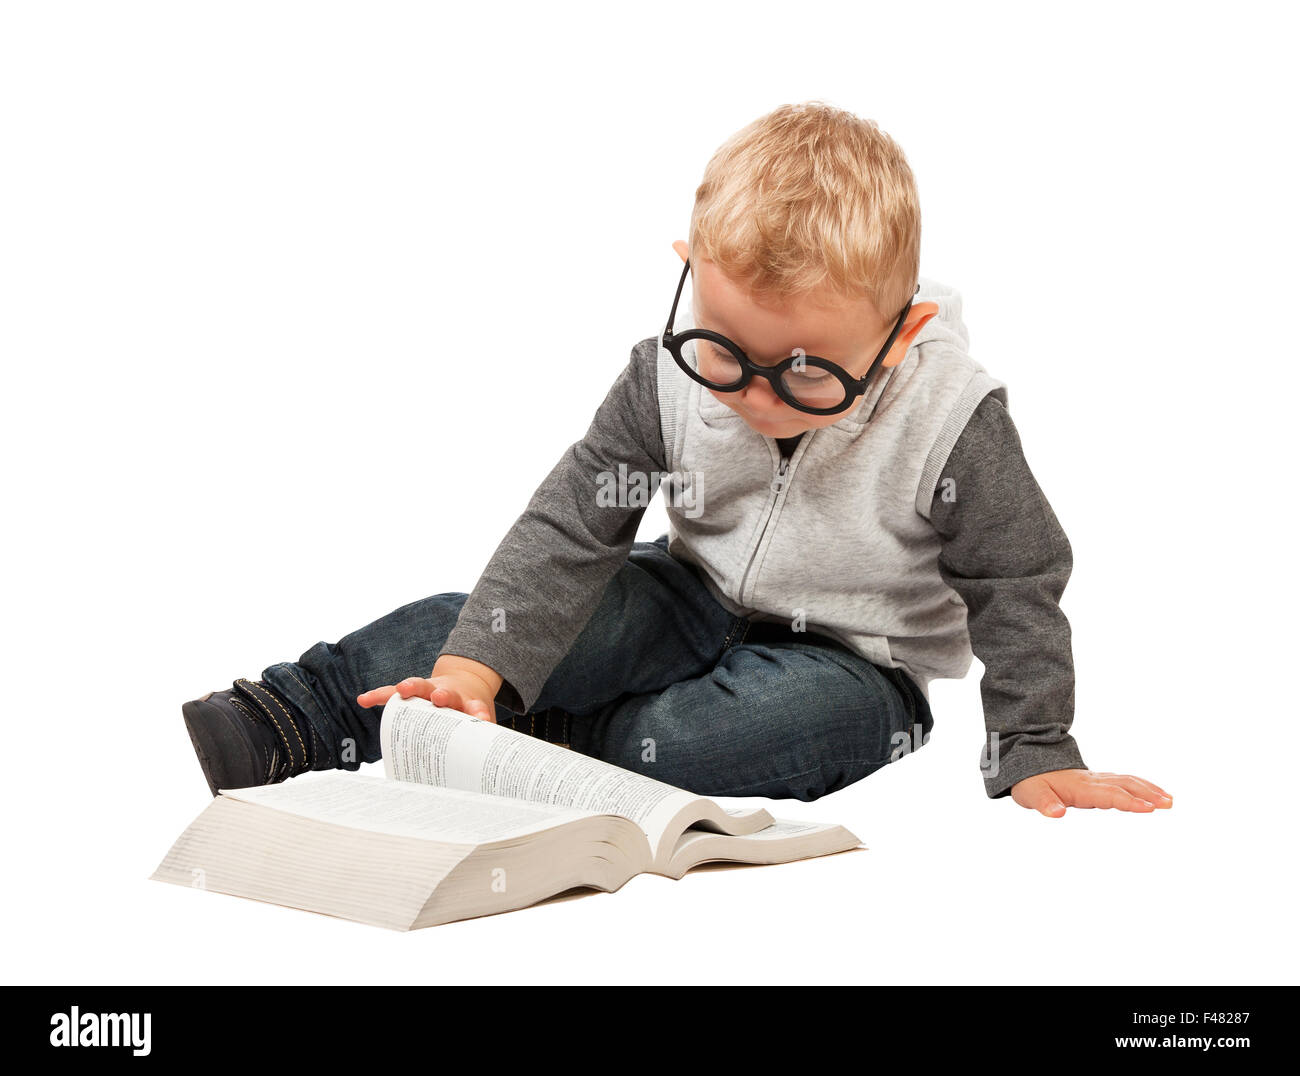 little child try to reading a book with funny glasses Stock Photo